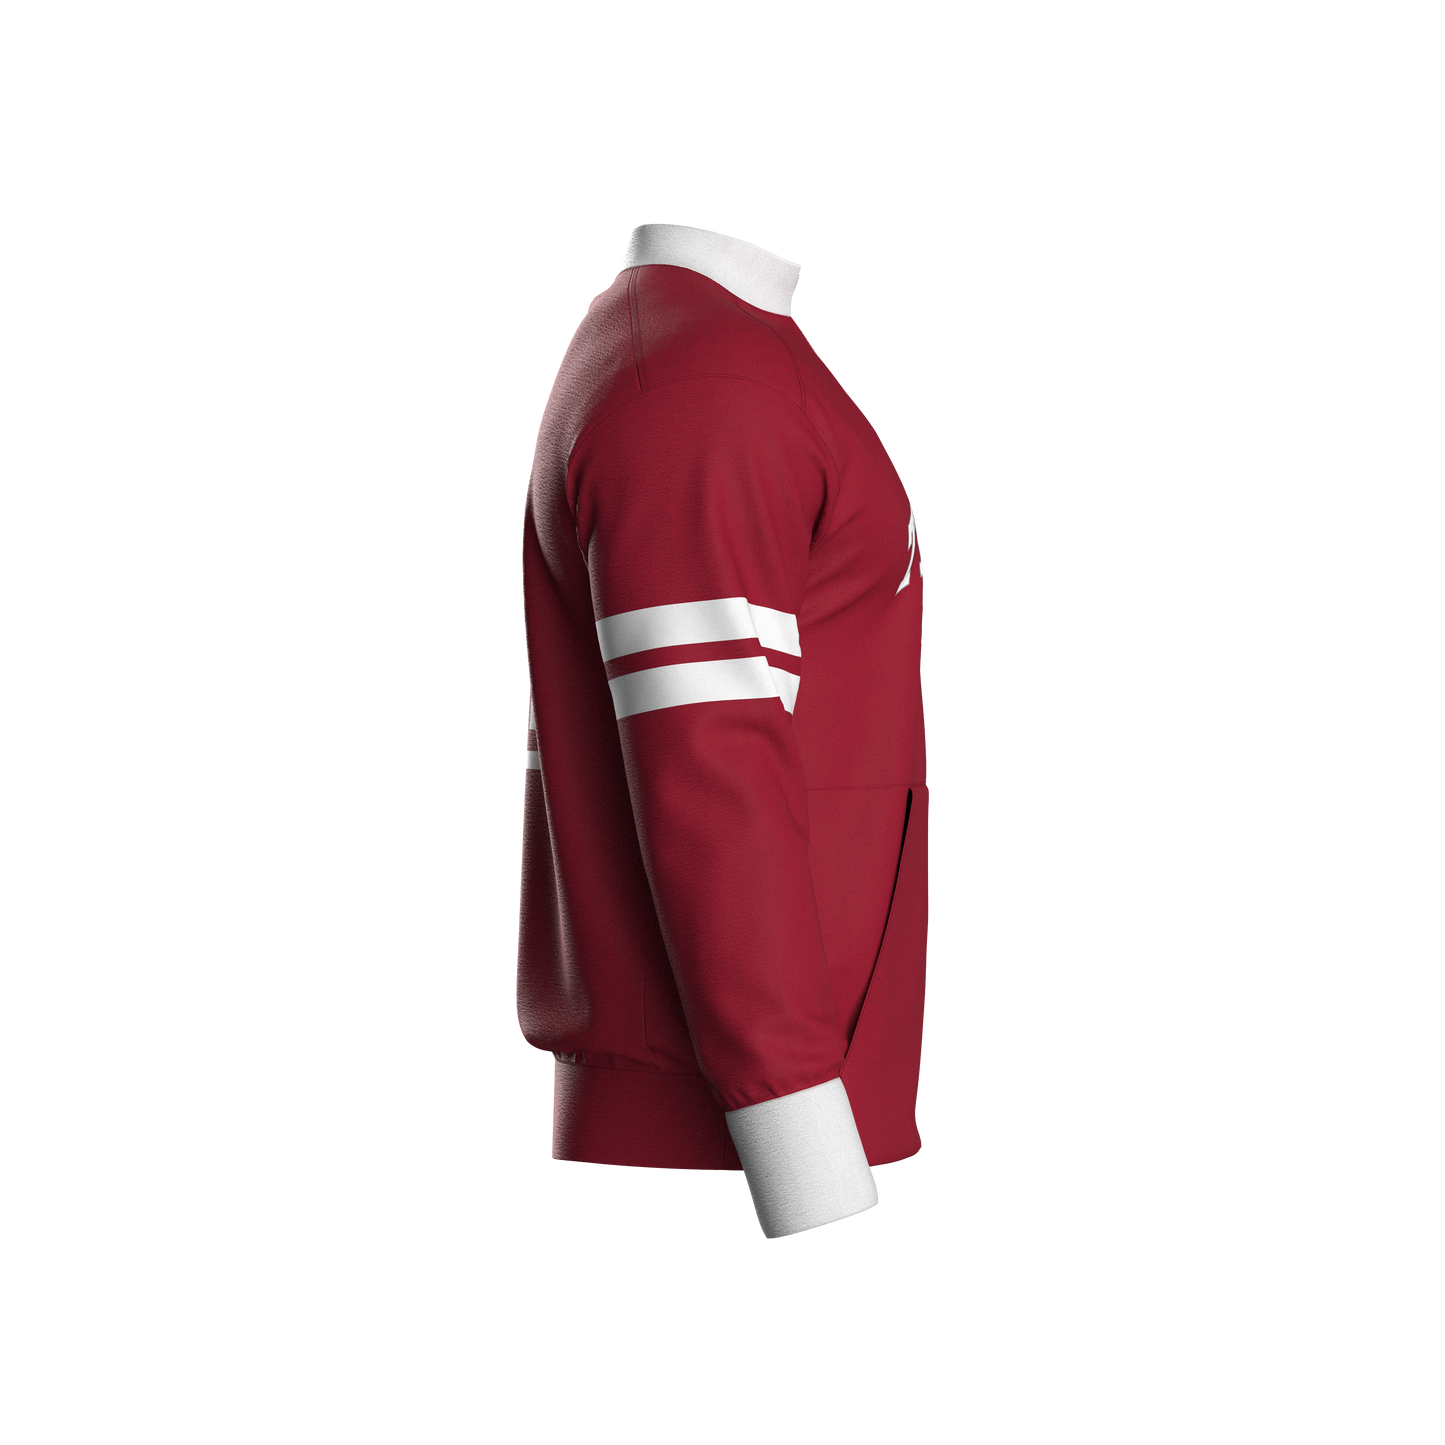 Temple University Home Pullover (youth)